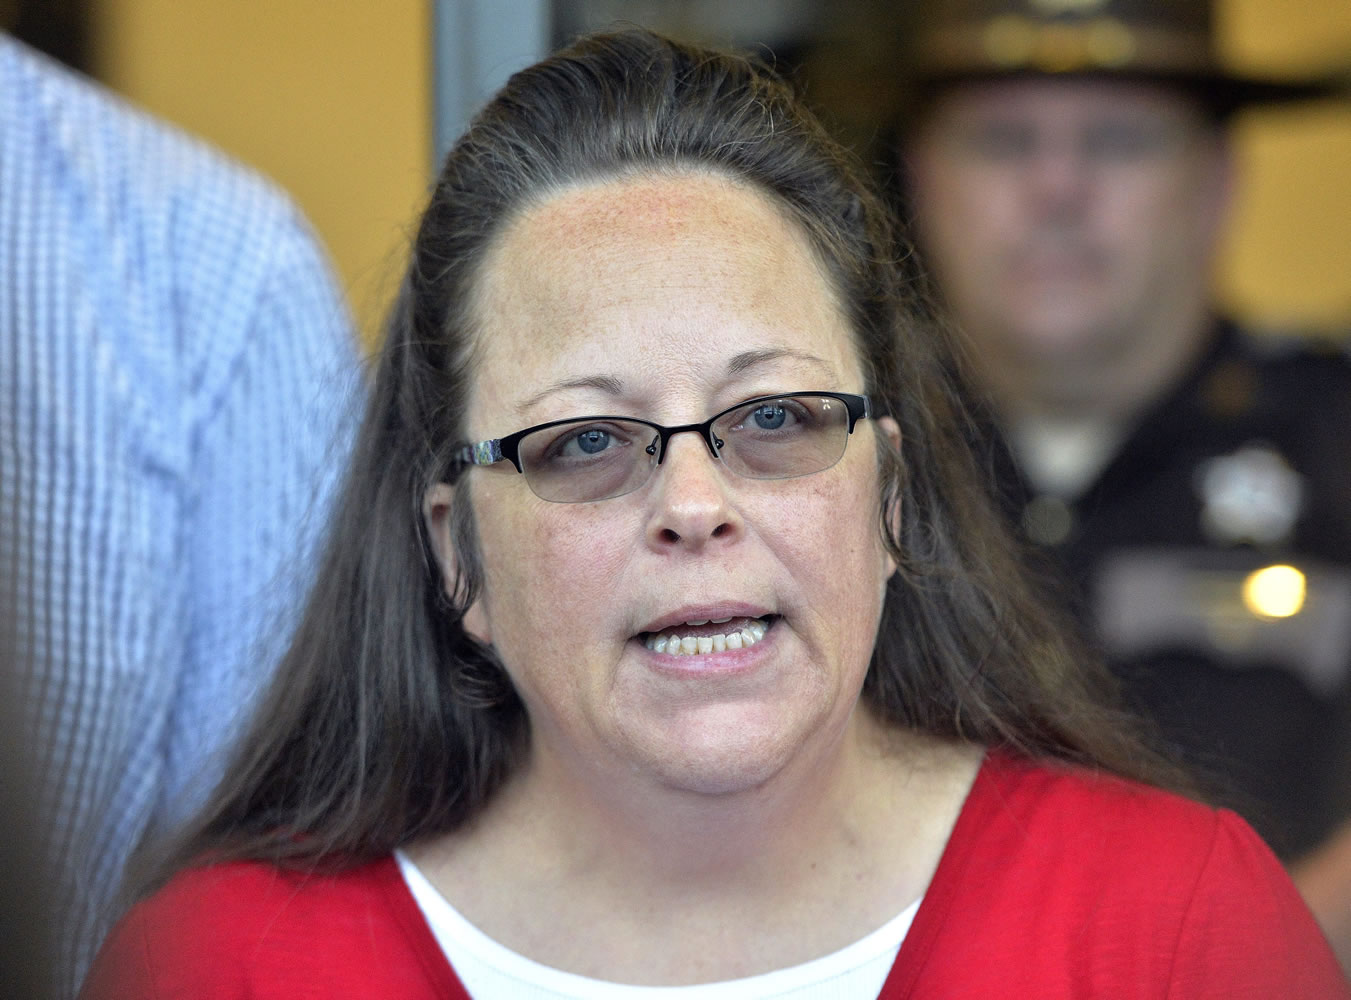 Rowan County Clerk Kim Davis says she met briefly with the pope during his historic visit to the United States. Vatican officials did not respond to an email asking for comment early Wednesday. (AP Photo/Timothy D.